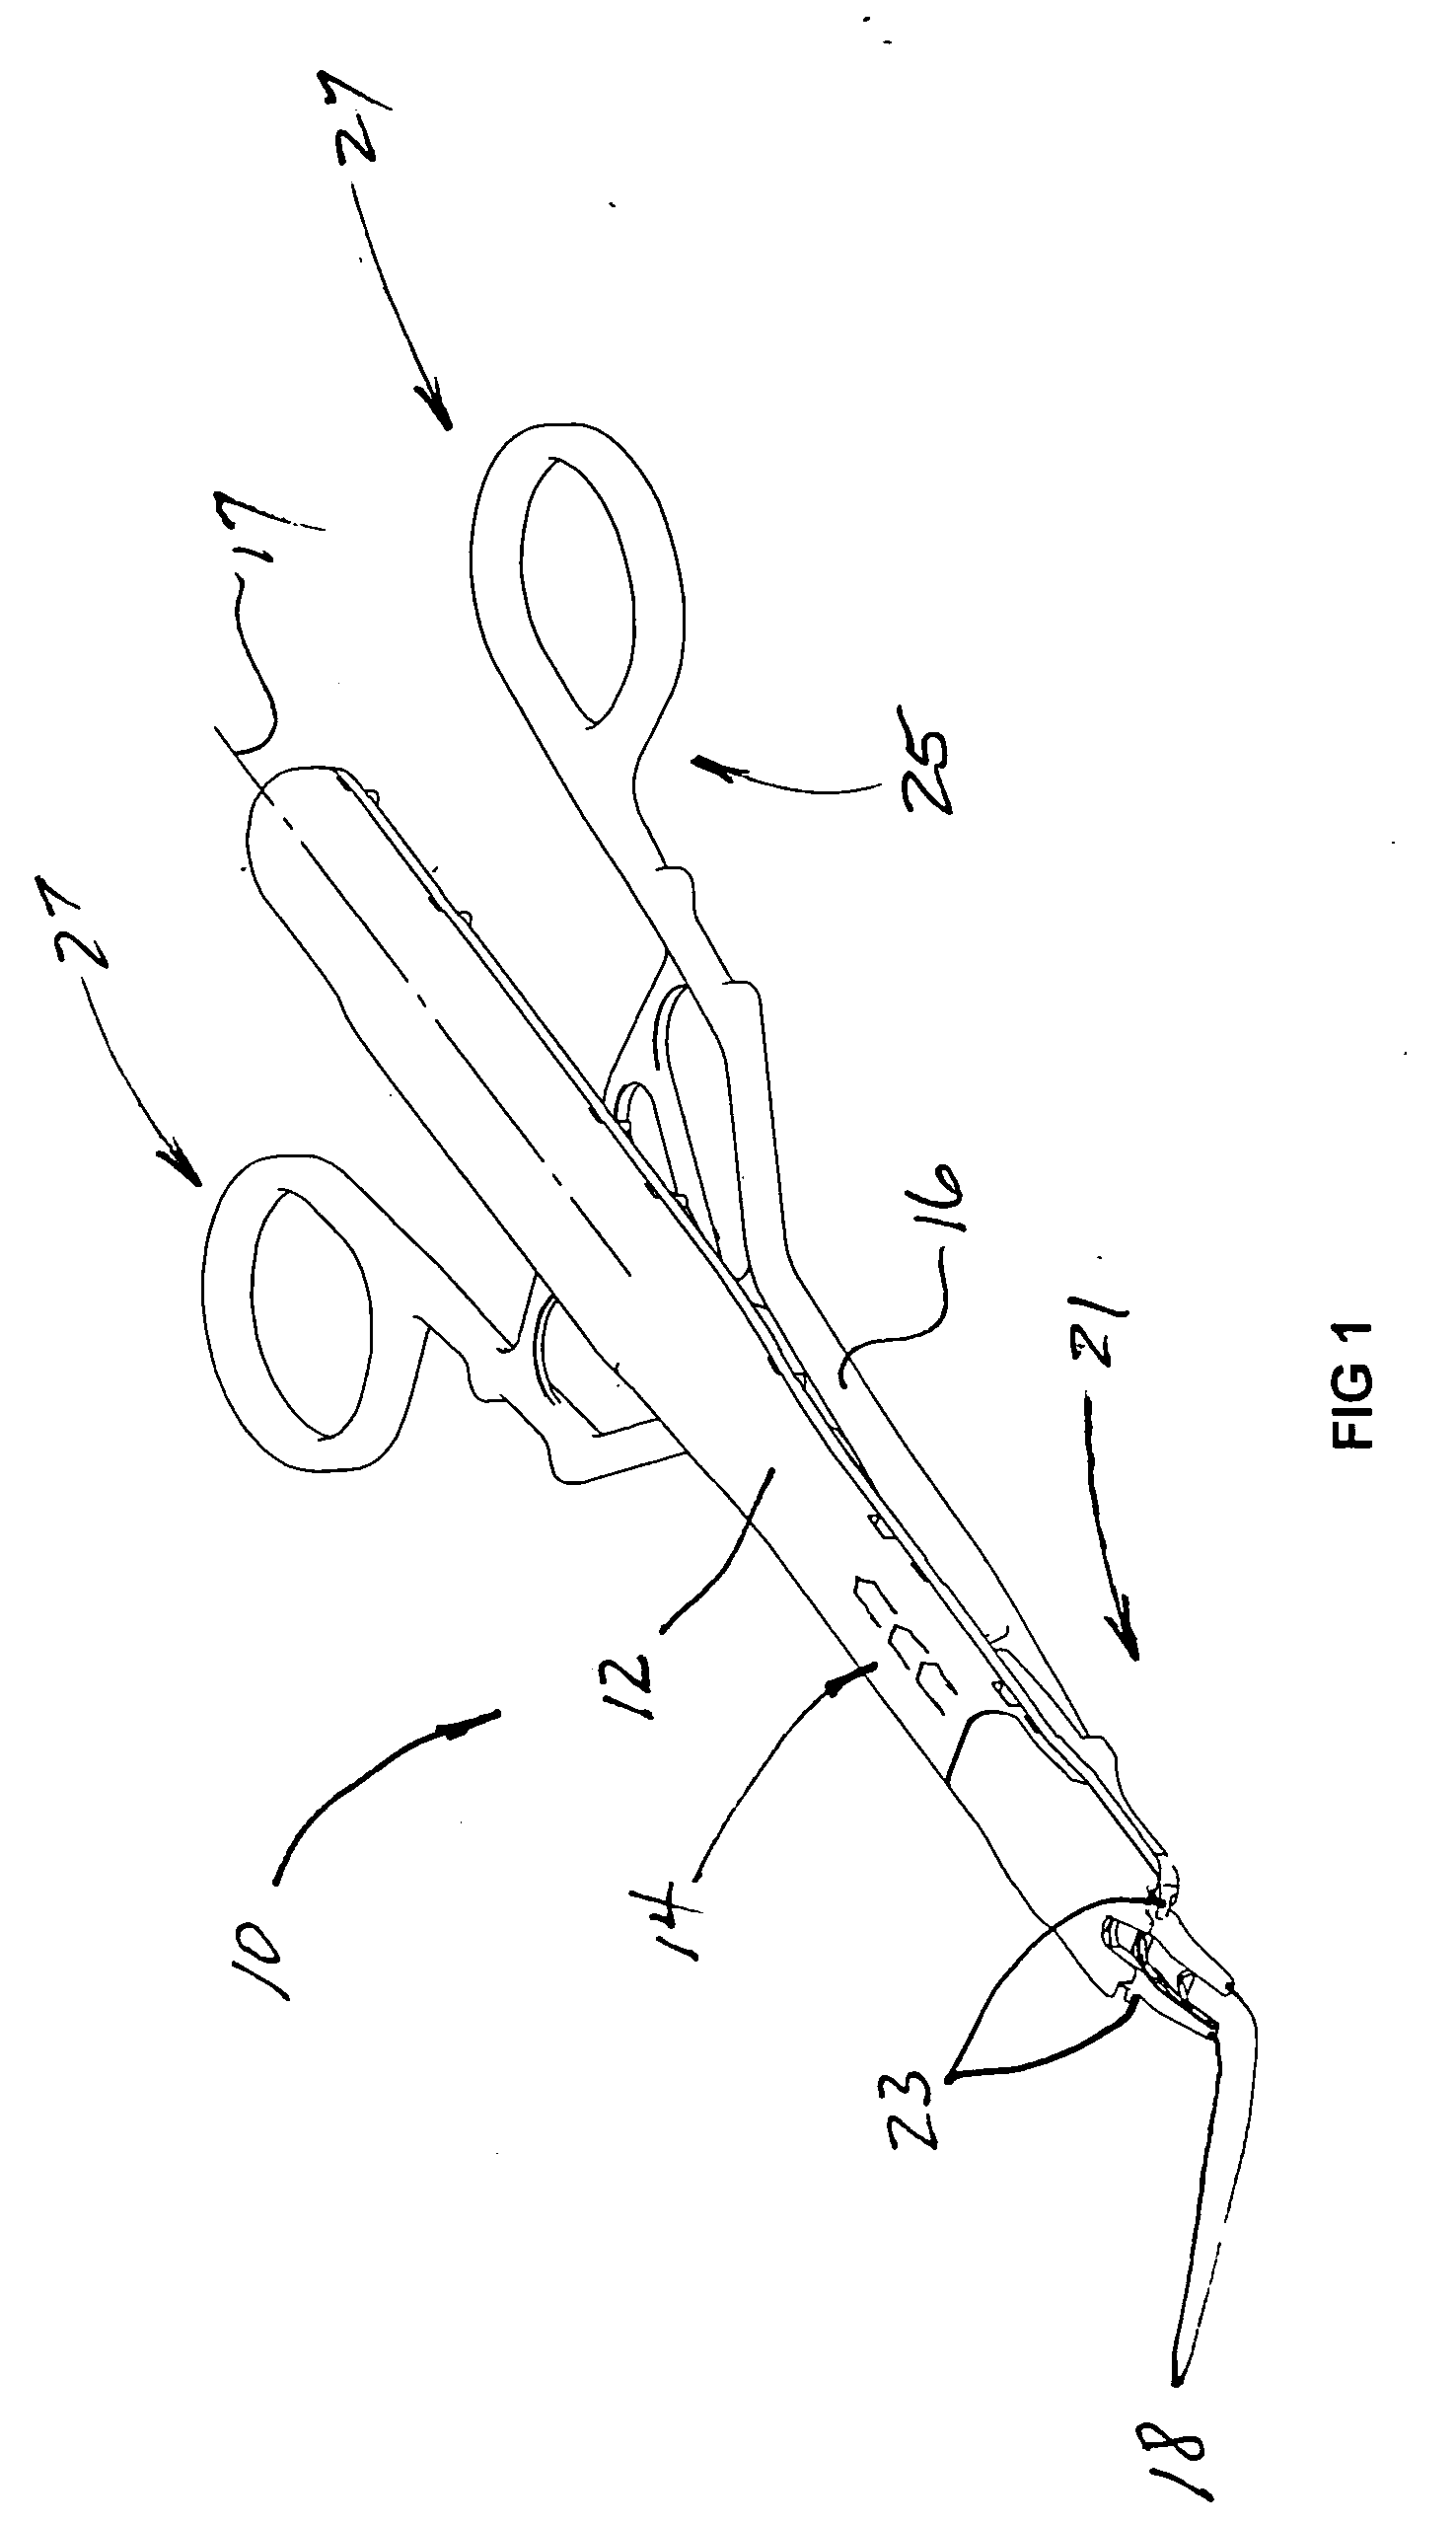 Surgical instrument with improved handle assembly